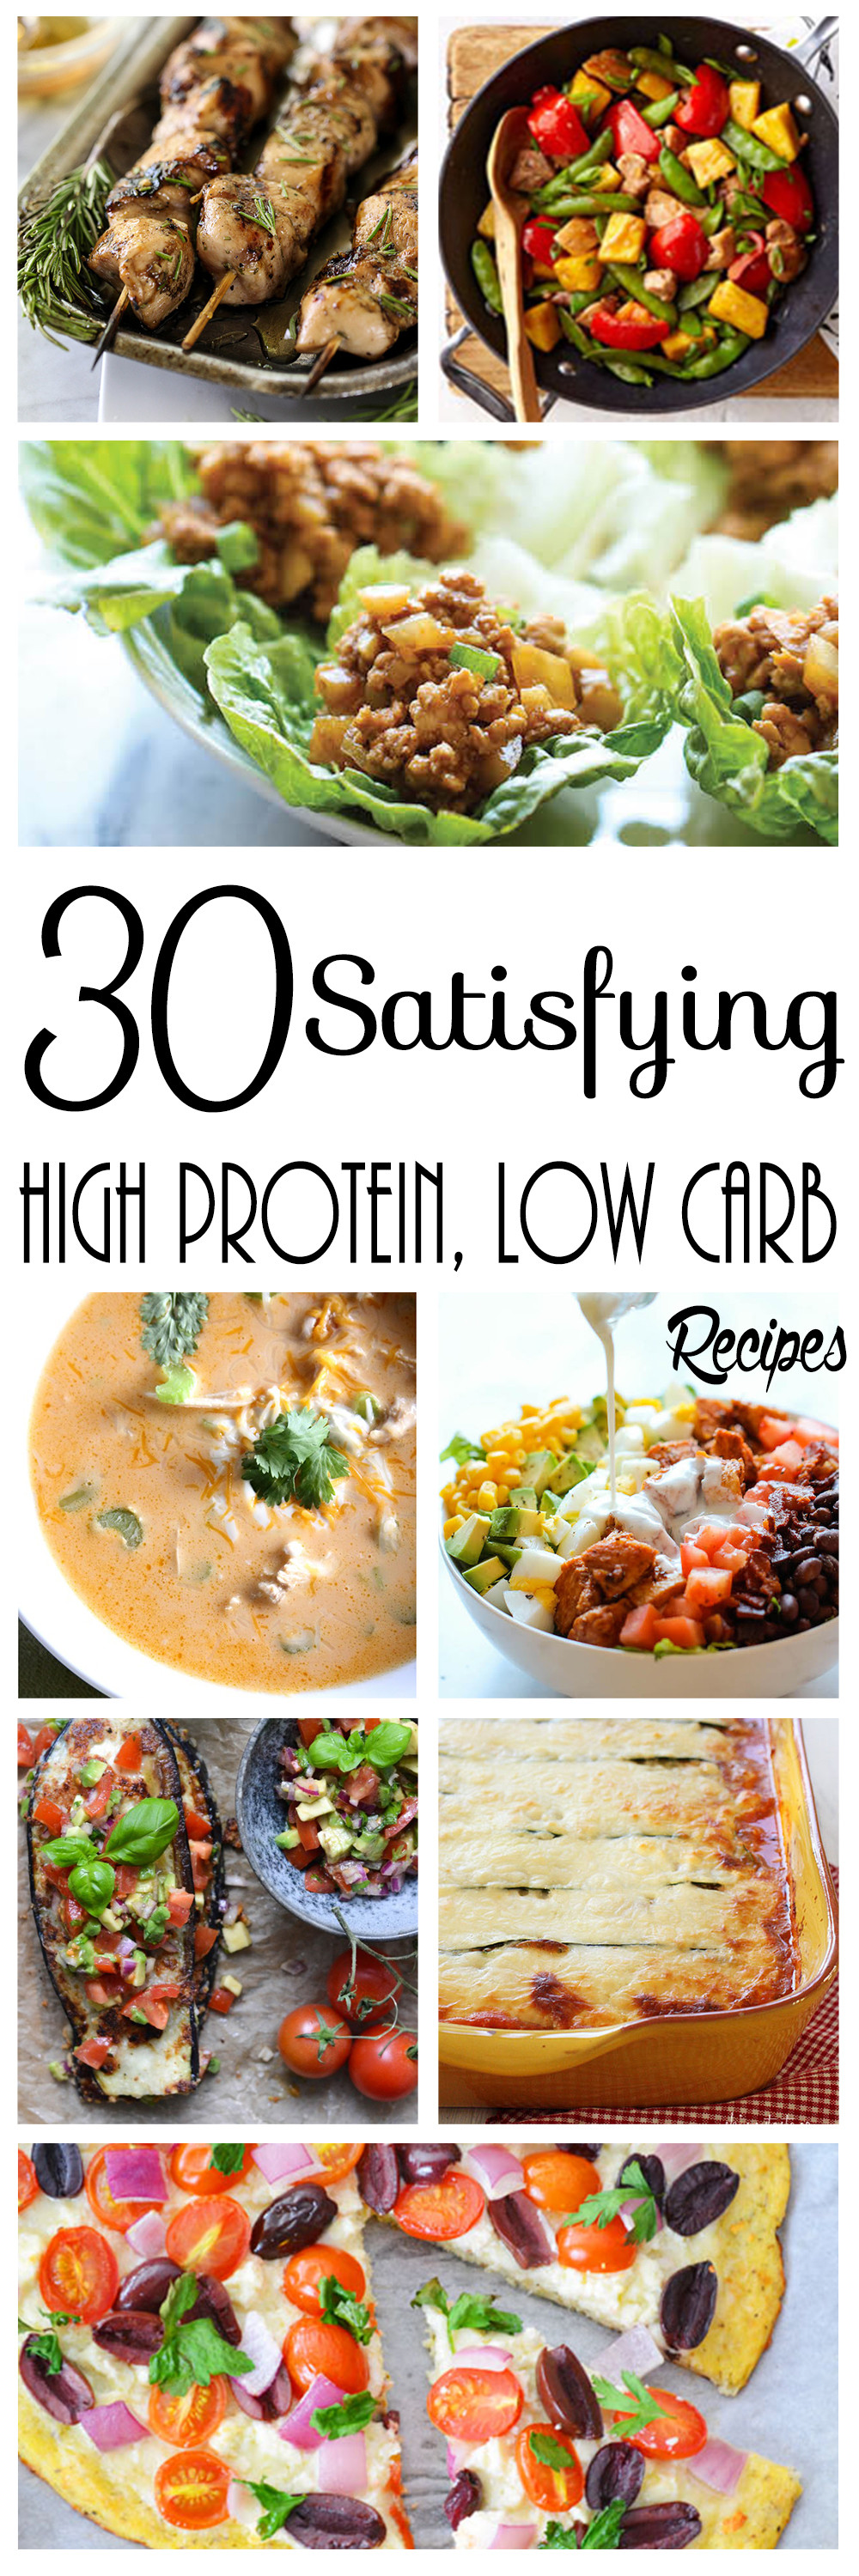 Protein Recipes Low Carb
 30 Satisfying High Protein Low Carb Recipes FULL